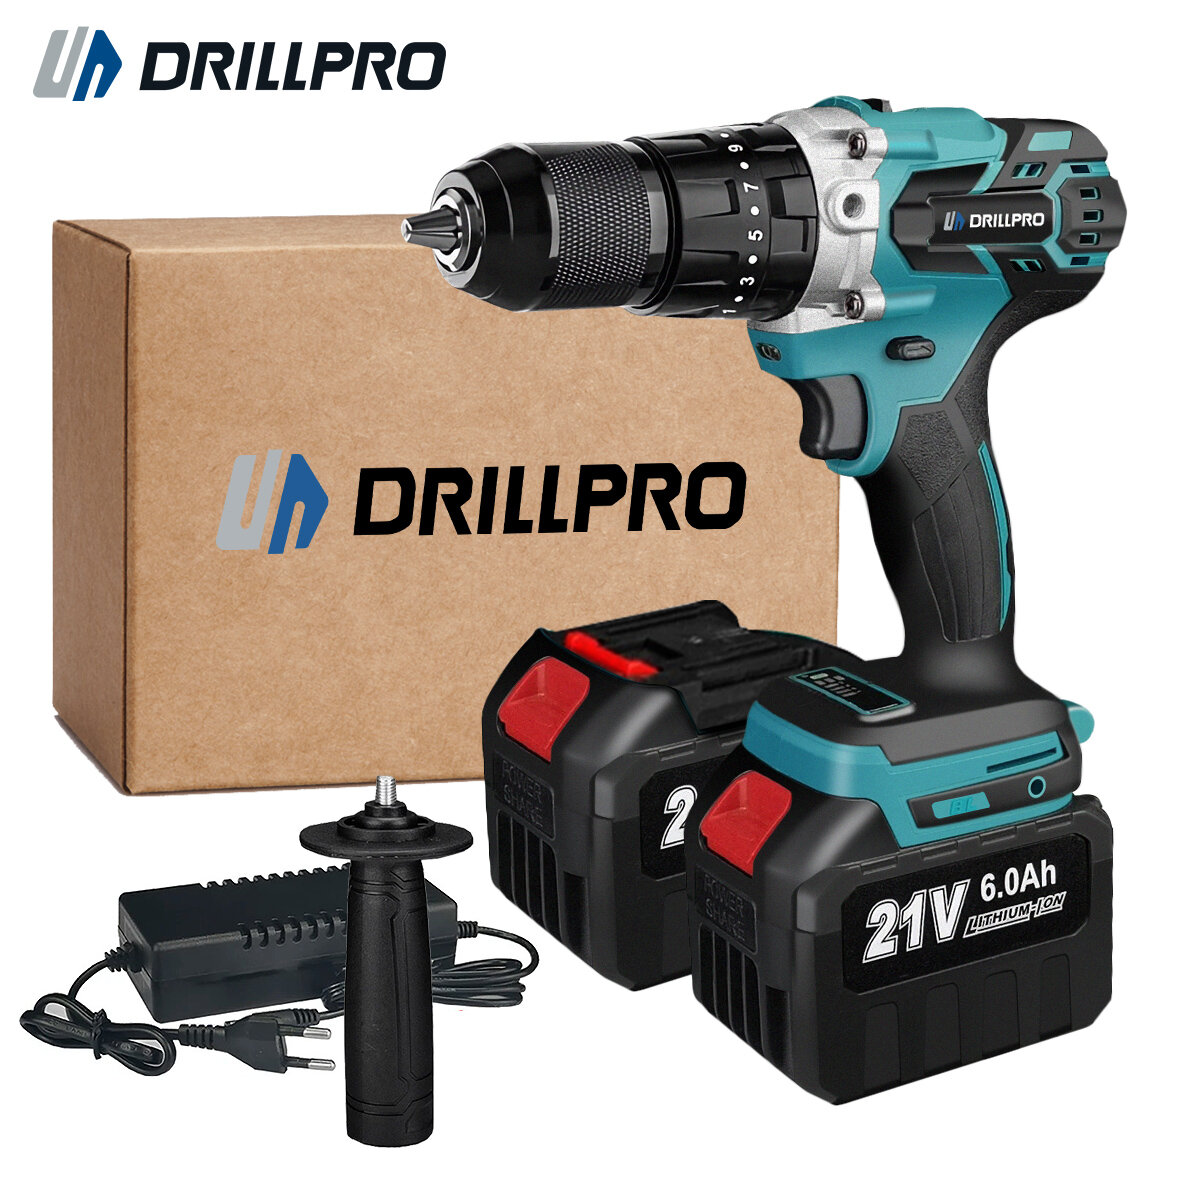 Image of Drillpro 21V High Torque Brushless Electric Drill with 1/2" Keyless Chuck LED Light 3-in-1 Functions 0-1800rpm Speed Inc